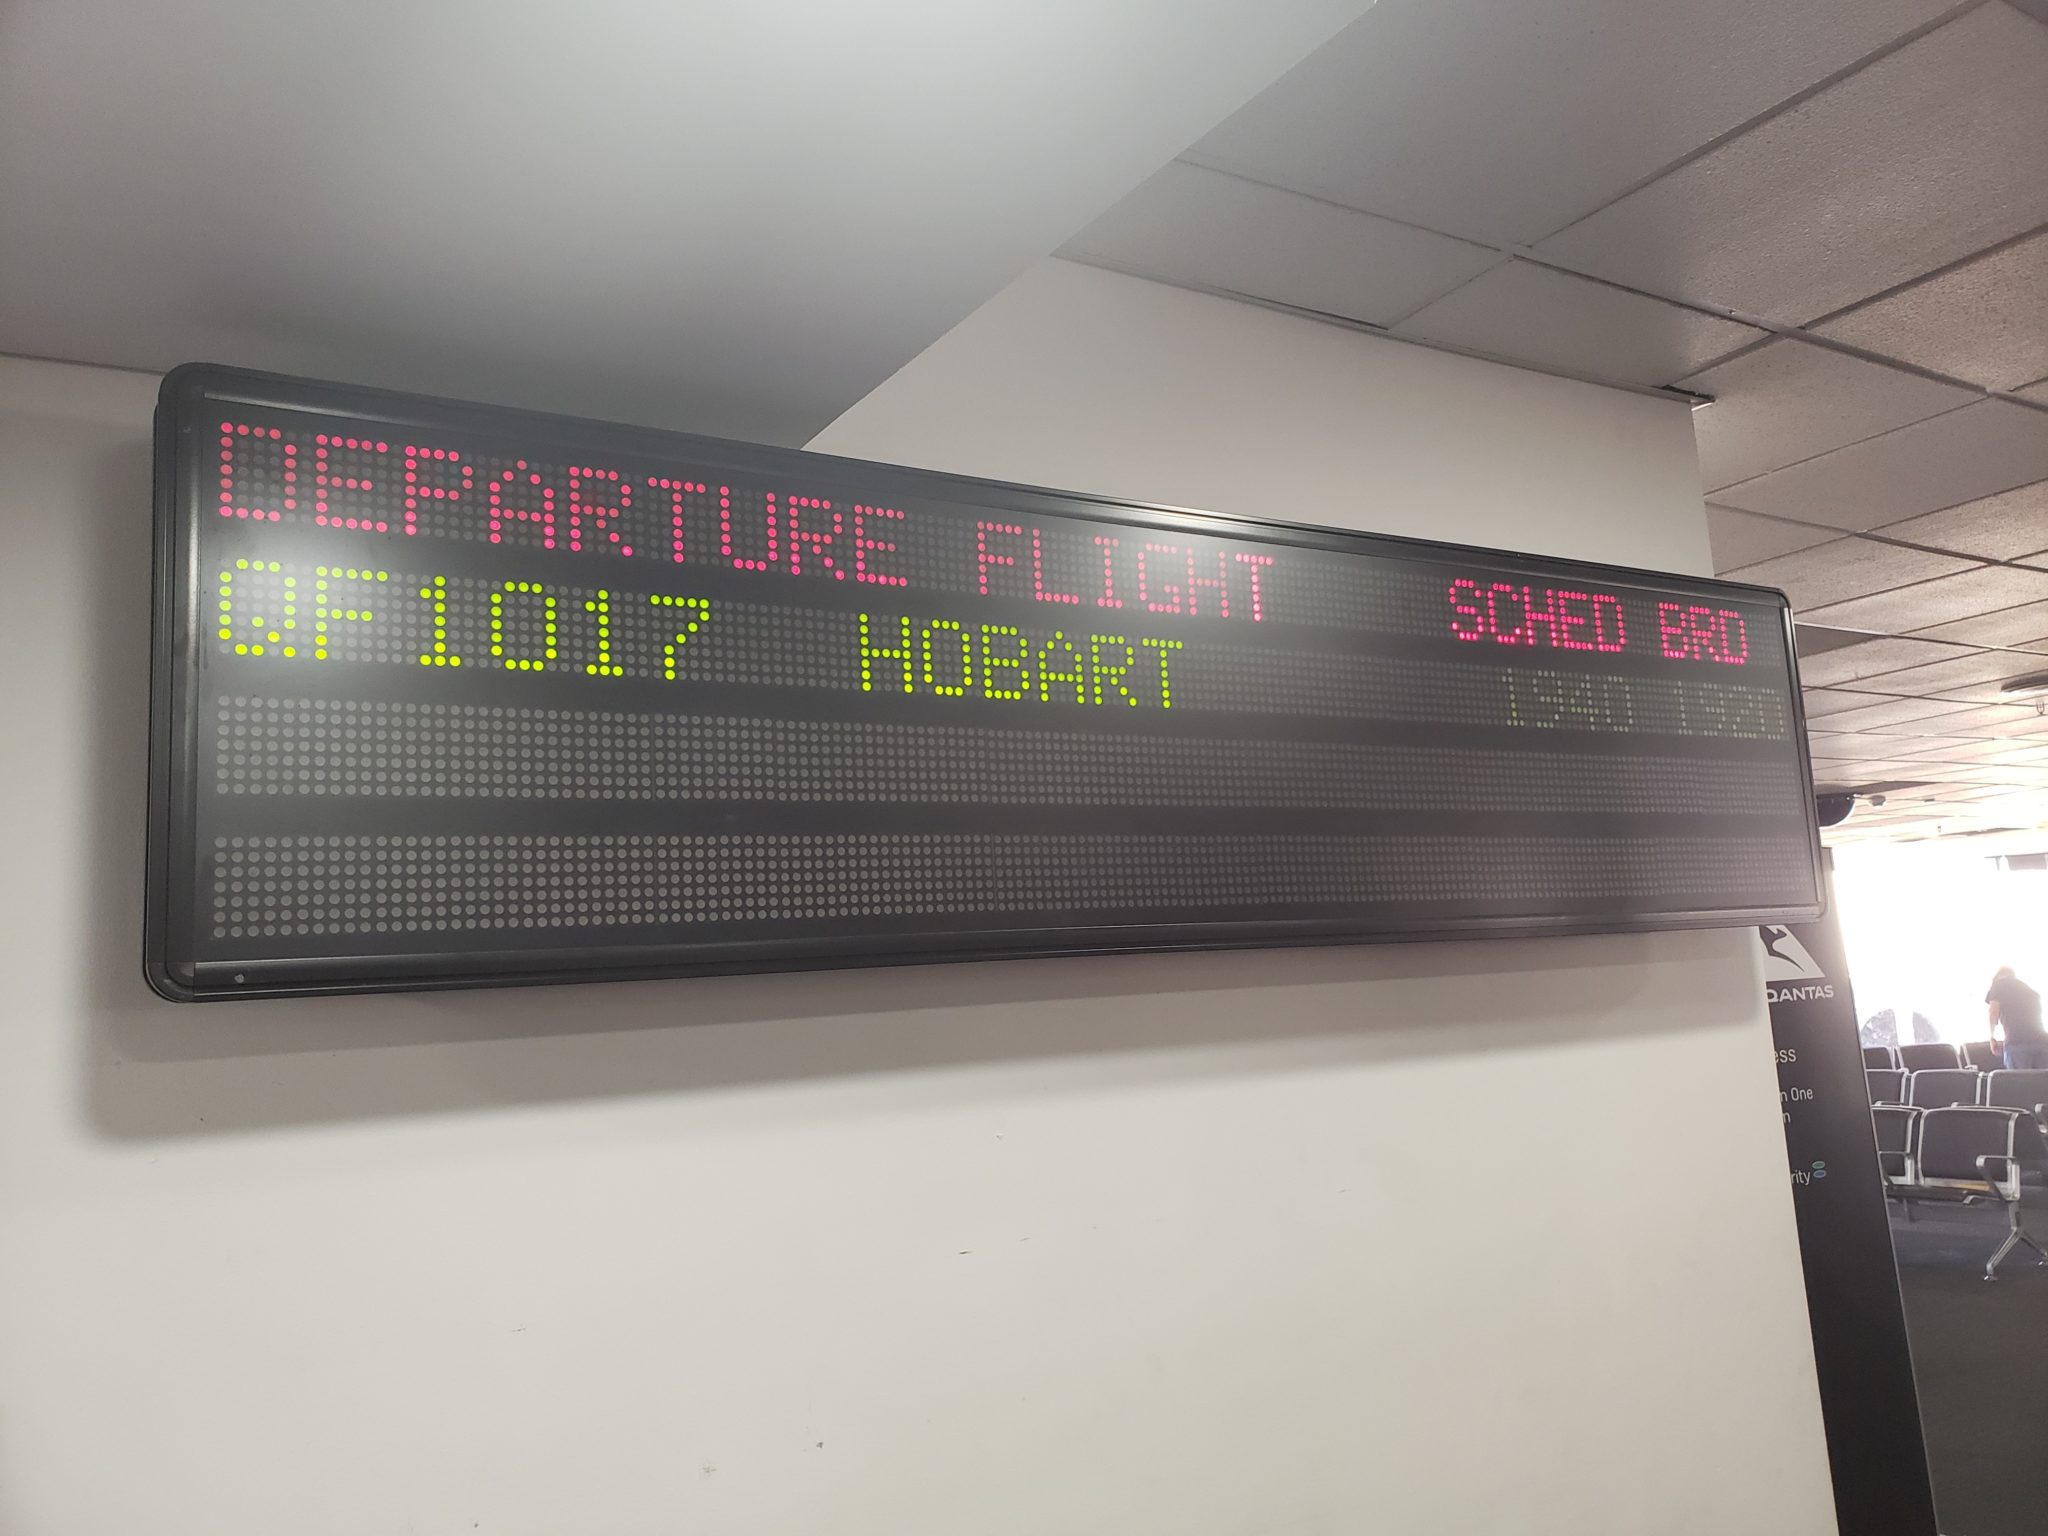 a sign with a flight schedule